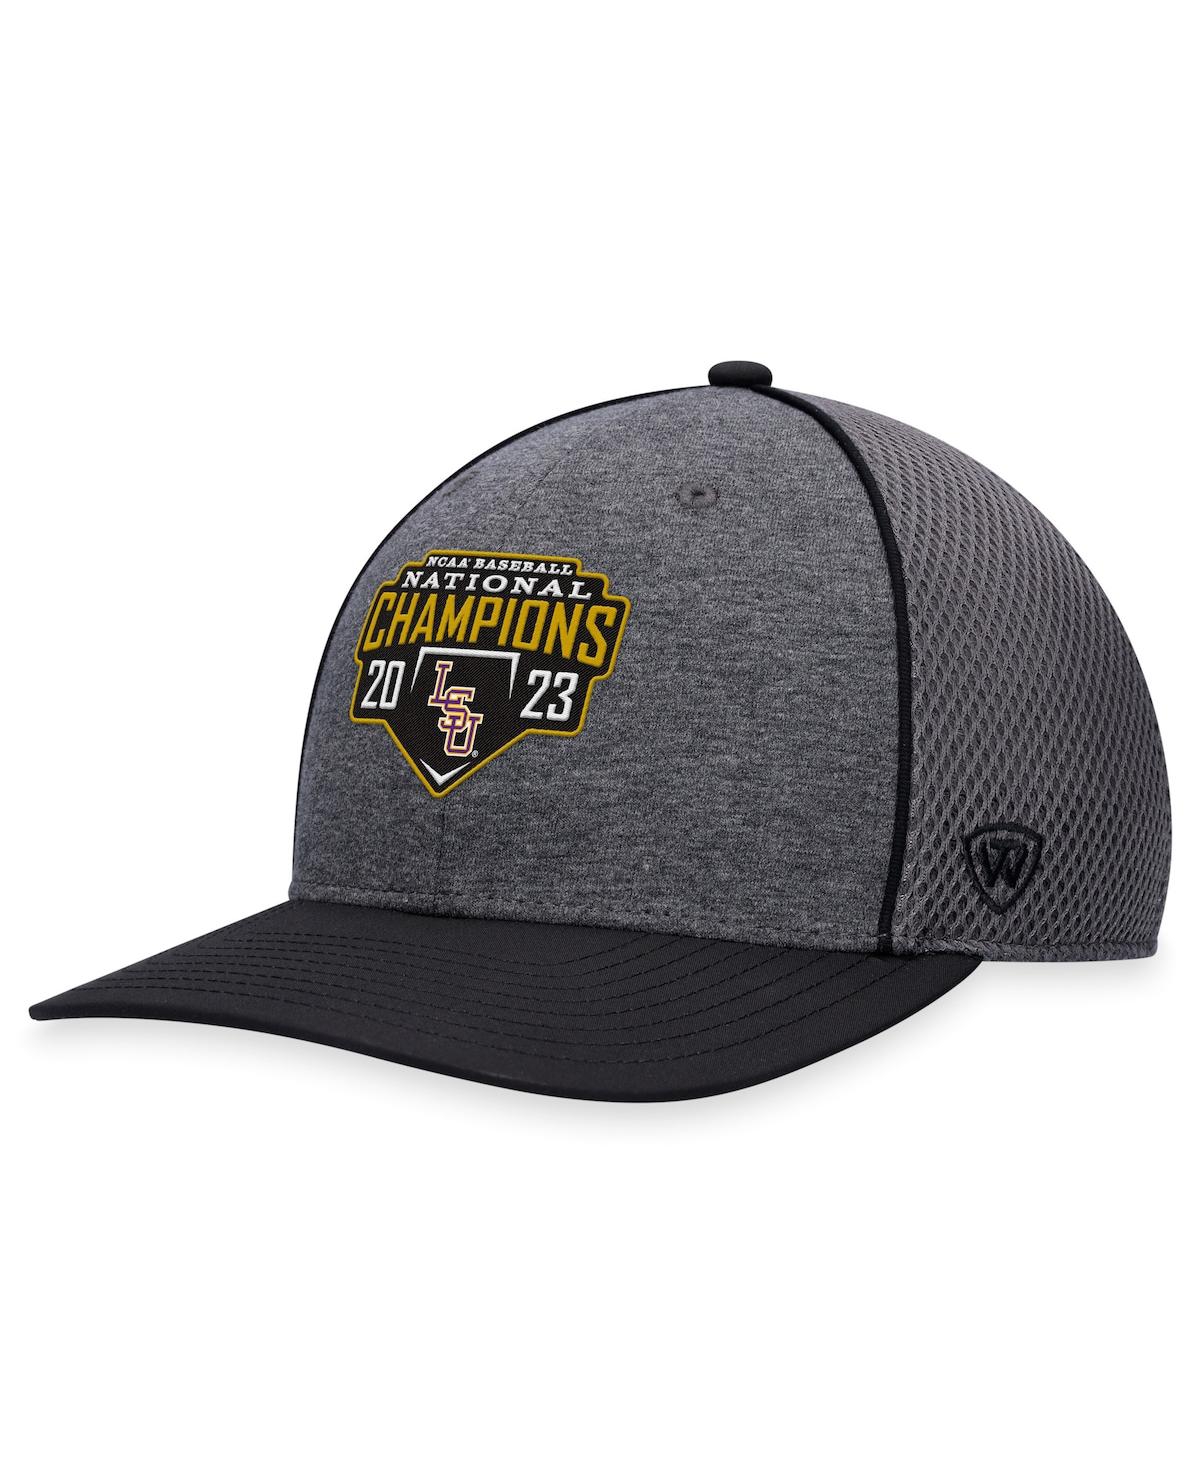 Men's and Women's Top of the World Charcoal Lsu Tigers 2023 Ncaa Men's Baseball College World Series Champions Mesh Back Adjustable Hat - Charcoal, He